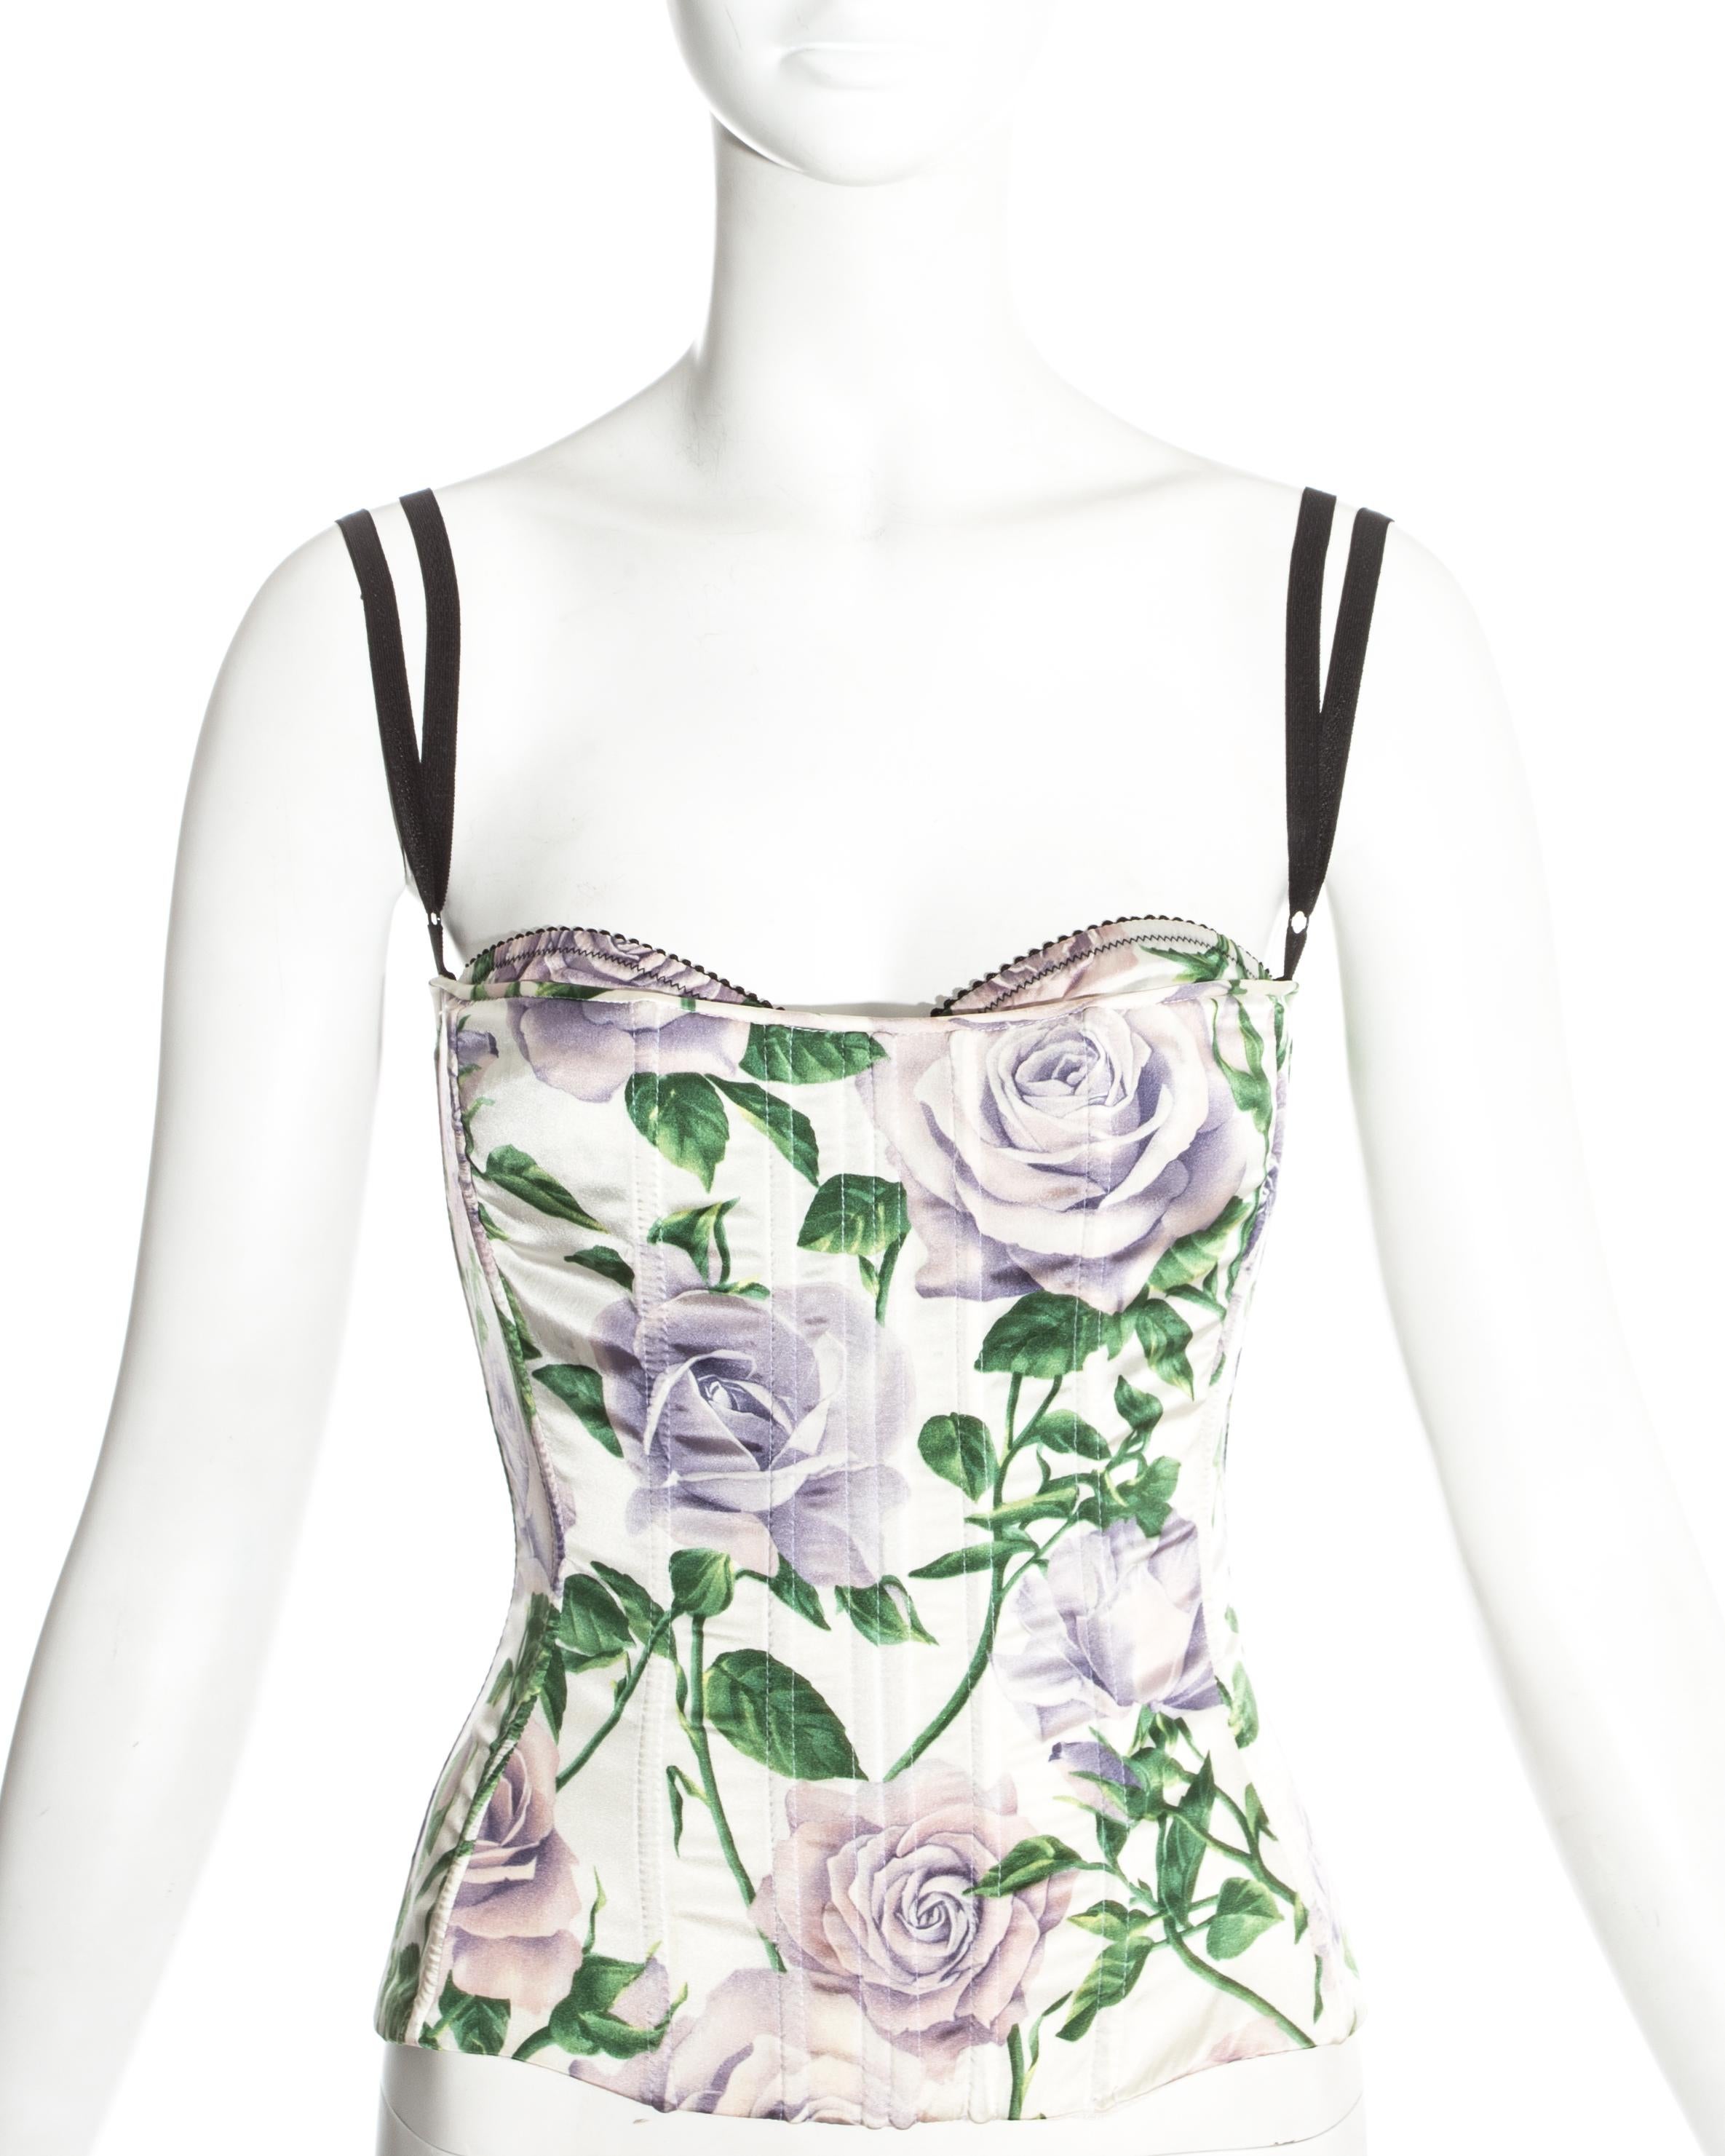 Dolce & Gabbana floral silk boned corset with built in matching bra. 

c. 1990s